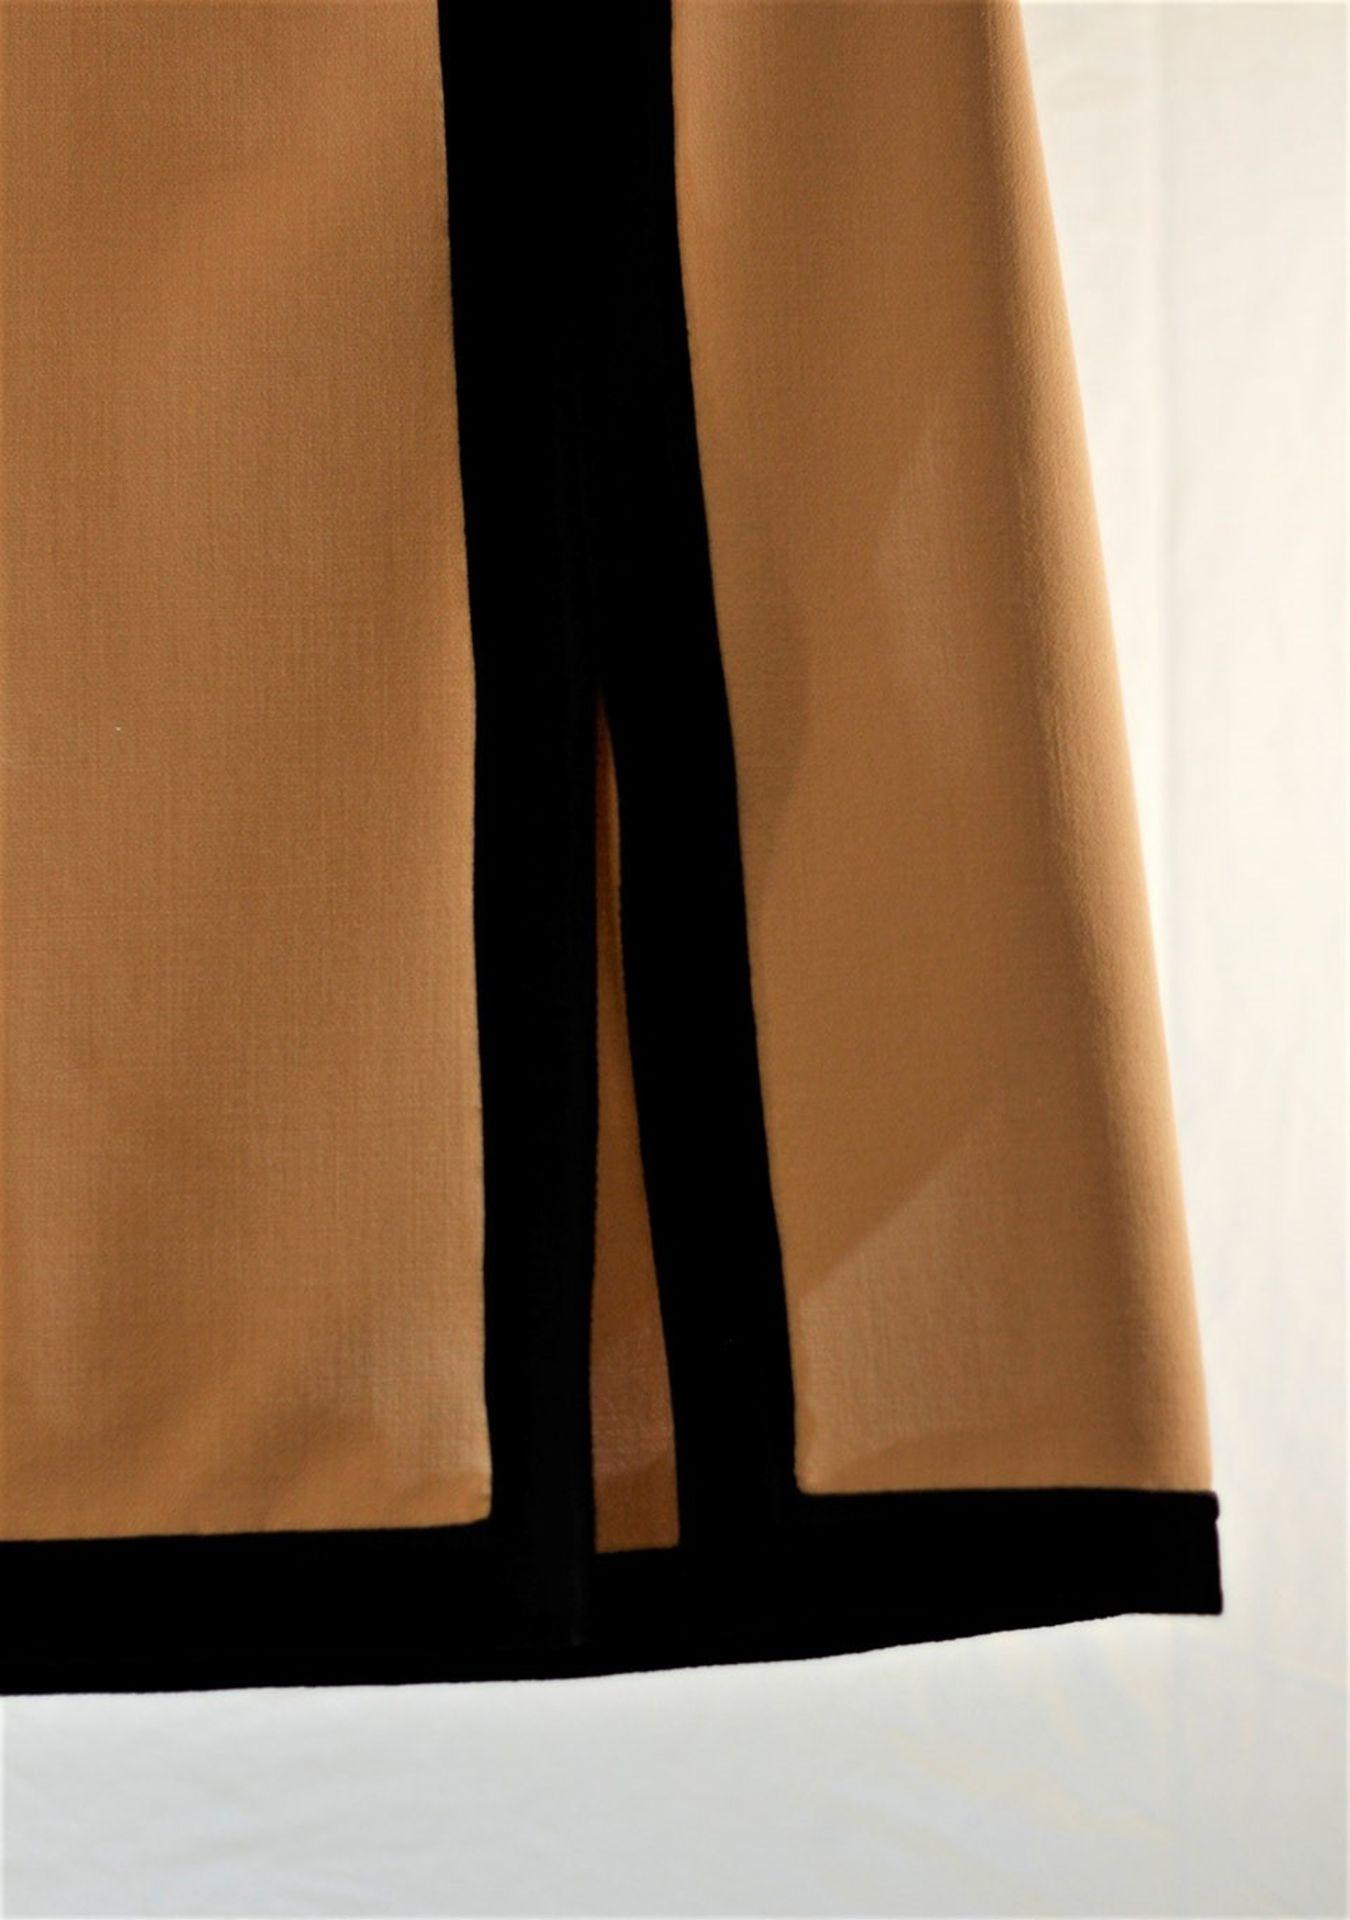 1 x Michael Kors Suntan And Black Skirt - Size: 14 - Material: 96% Virgin Wool, 4% Spandex - From - Image 5 of 7